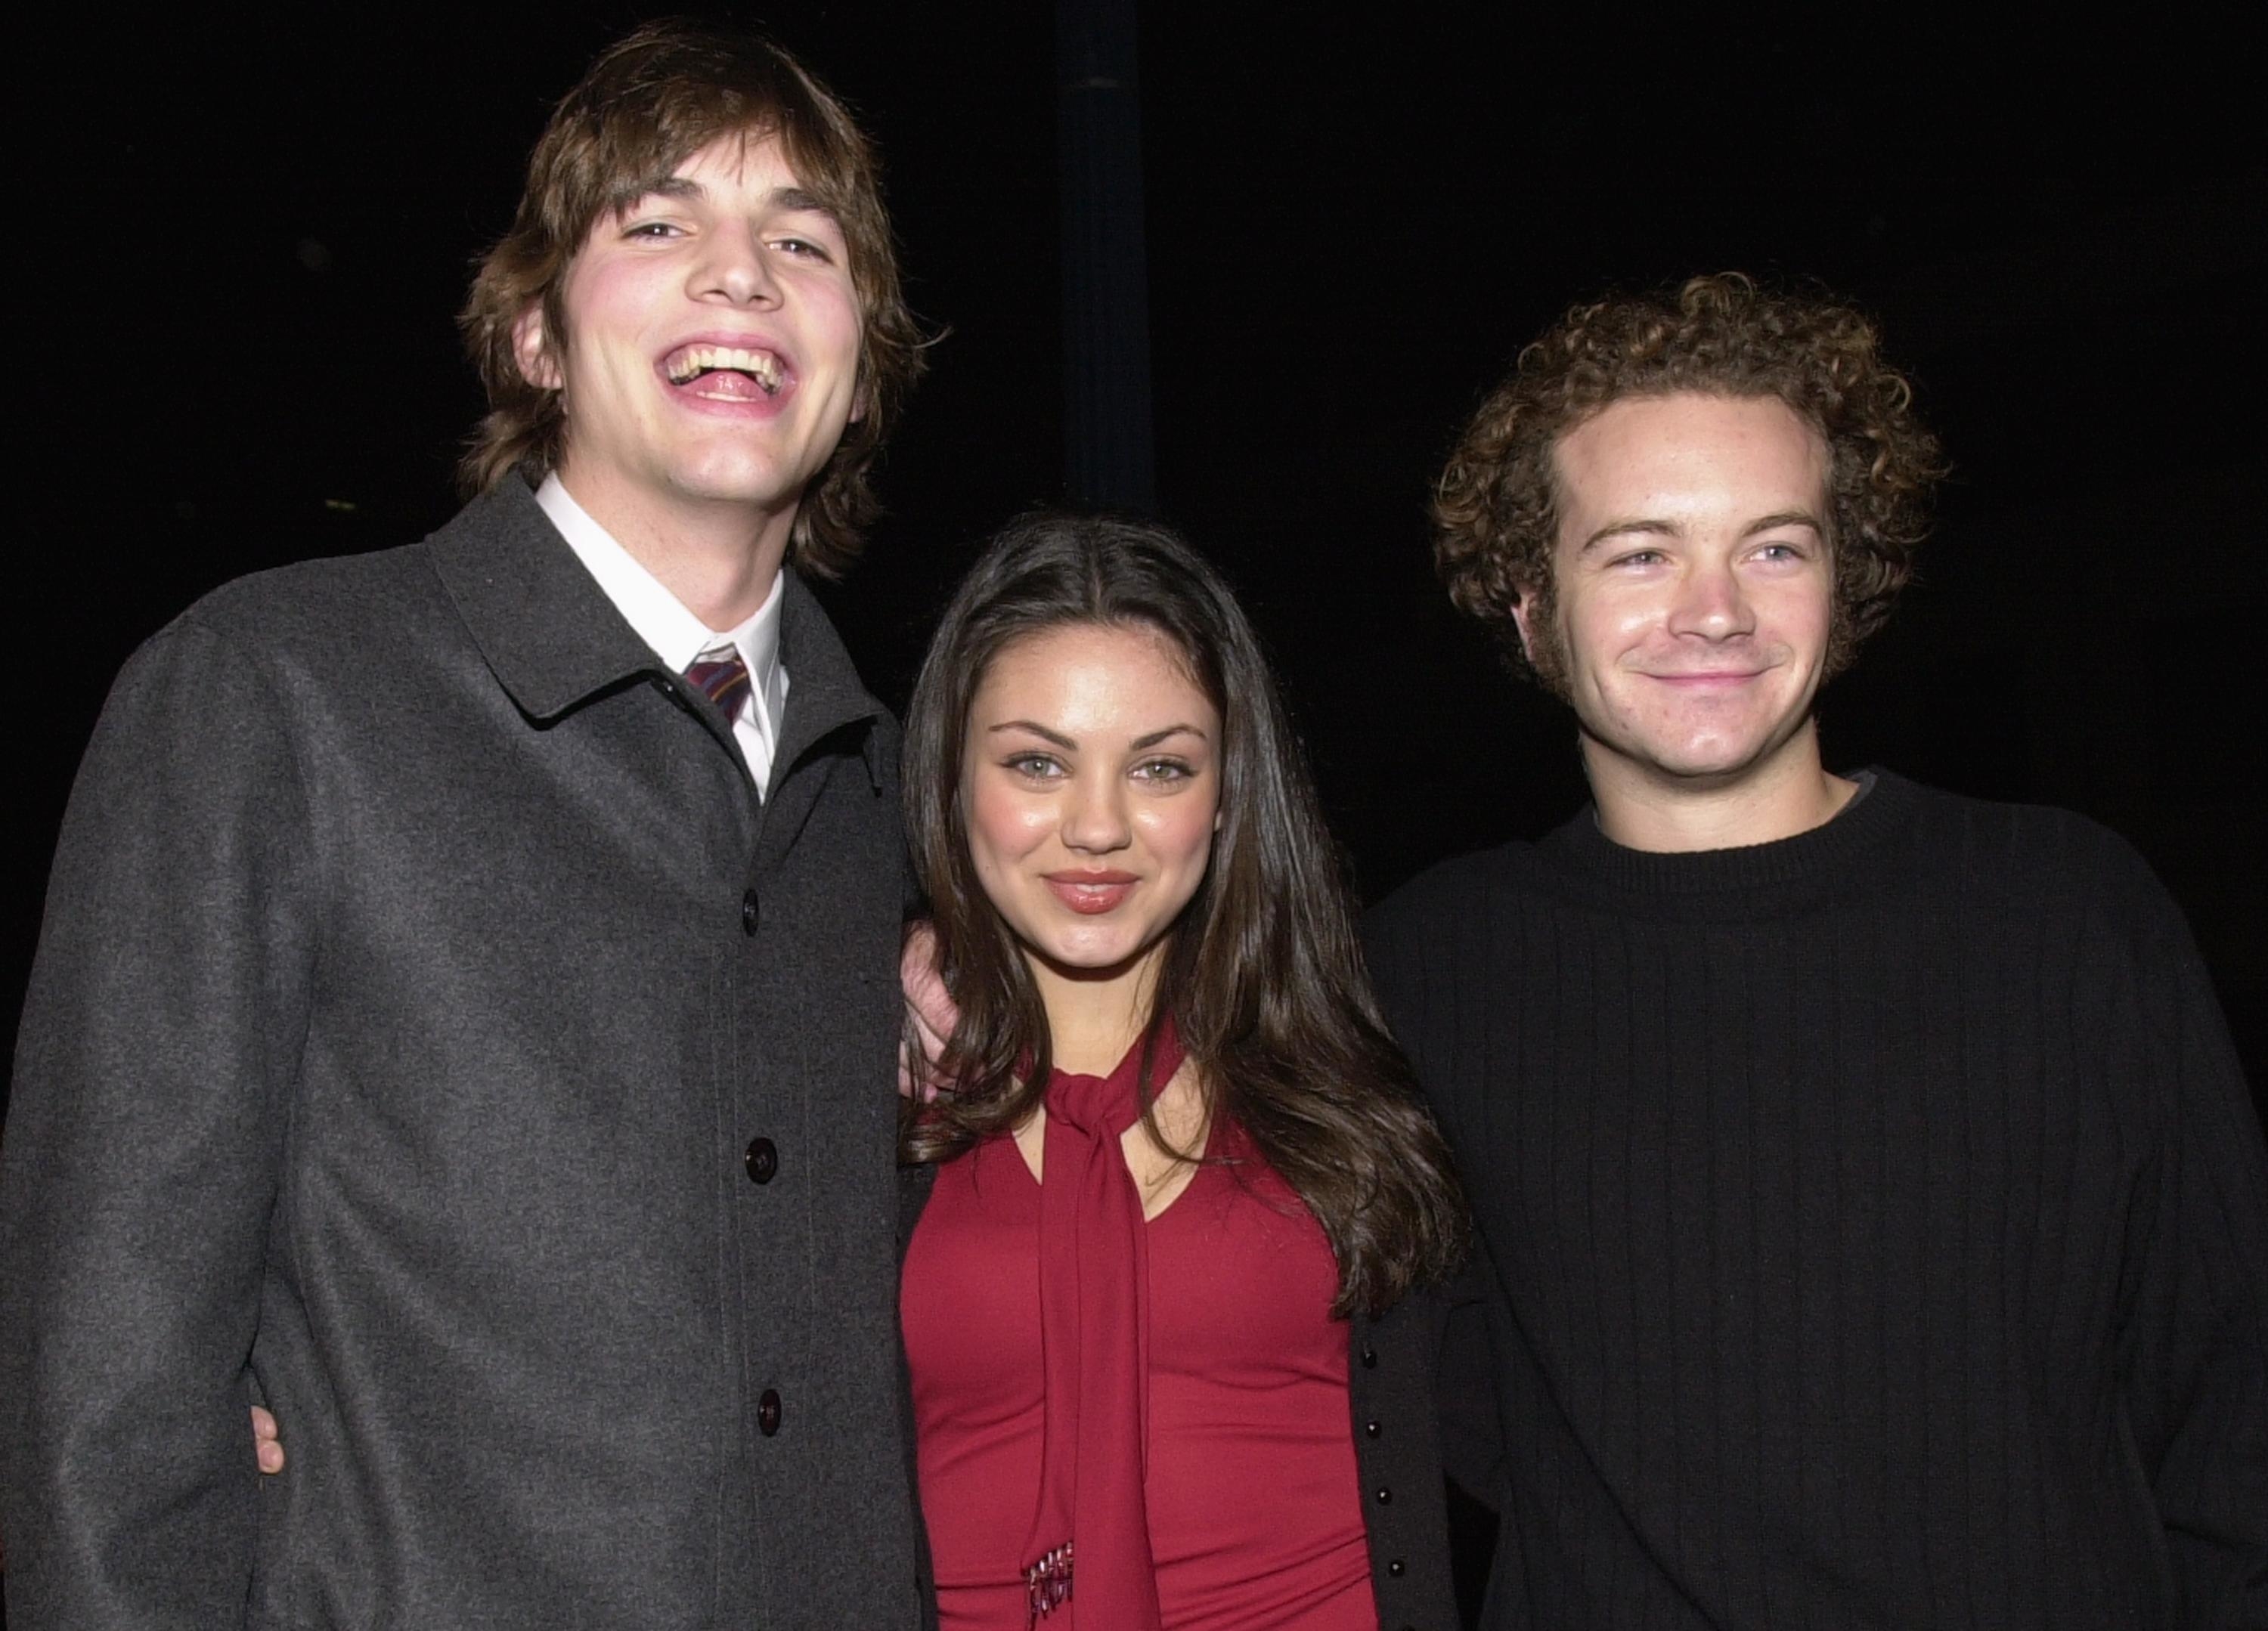 Close-up of Ashton, Danny, and Mila smiling